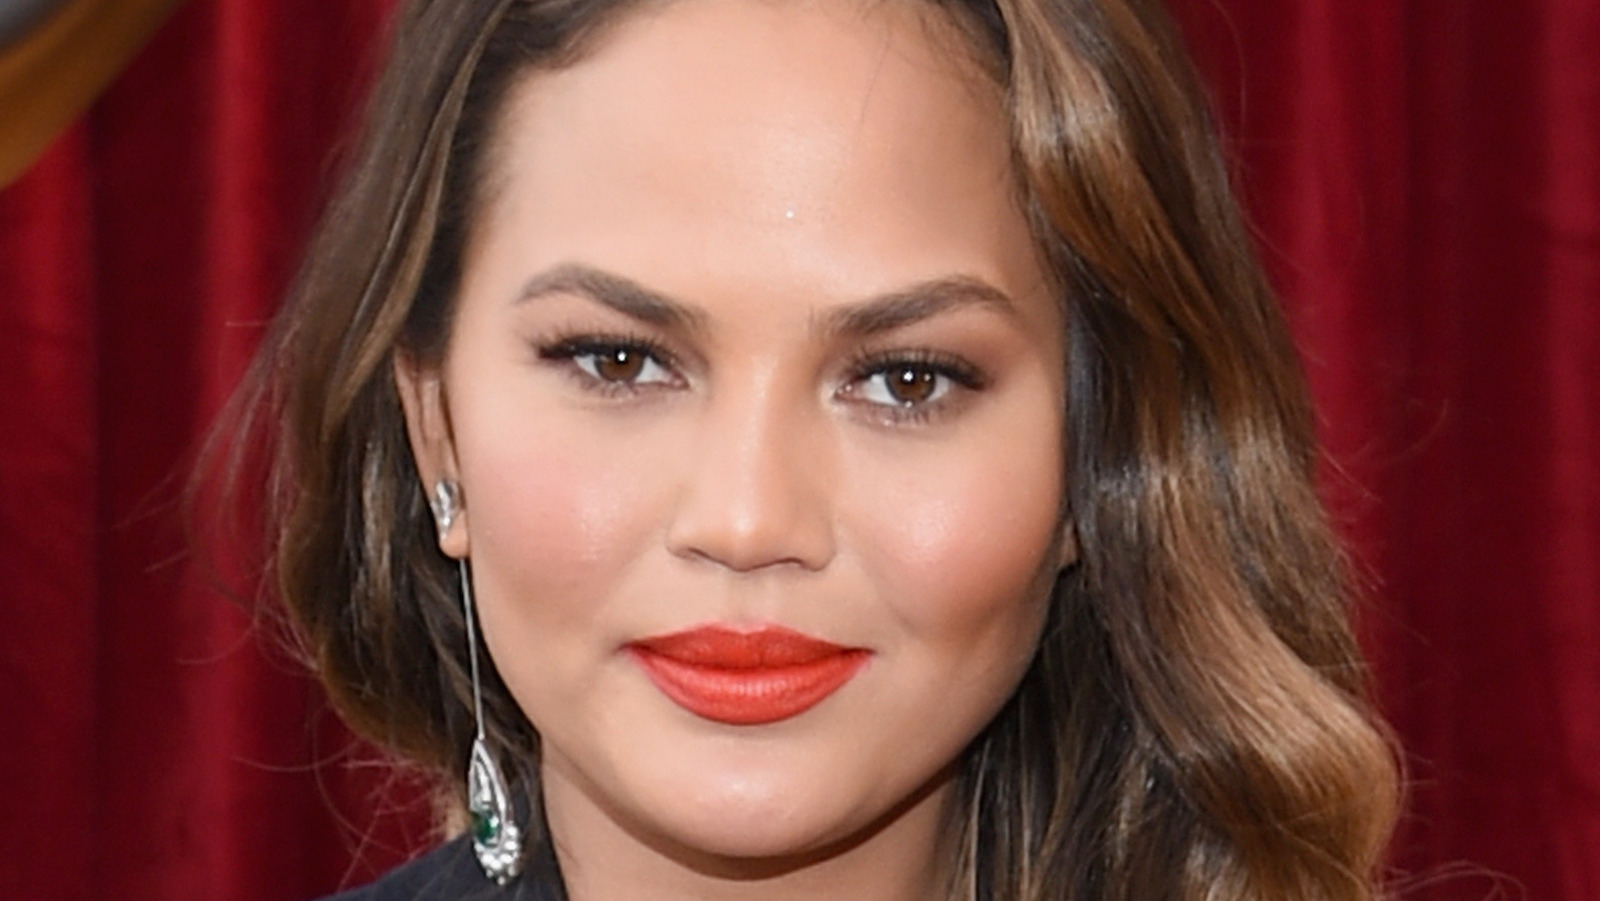 Chrissy Teigen's cookware line is dropped from retail giant Macy's